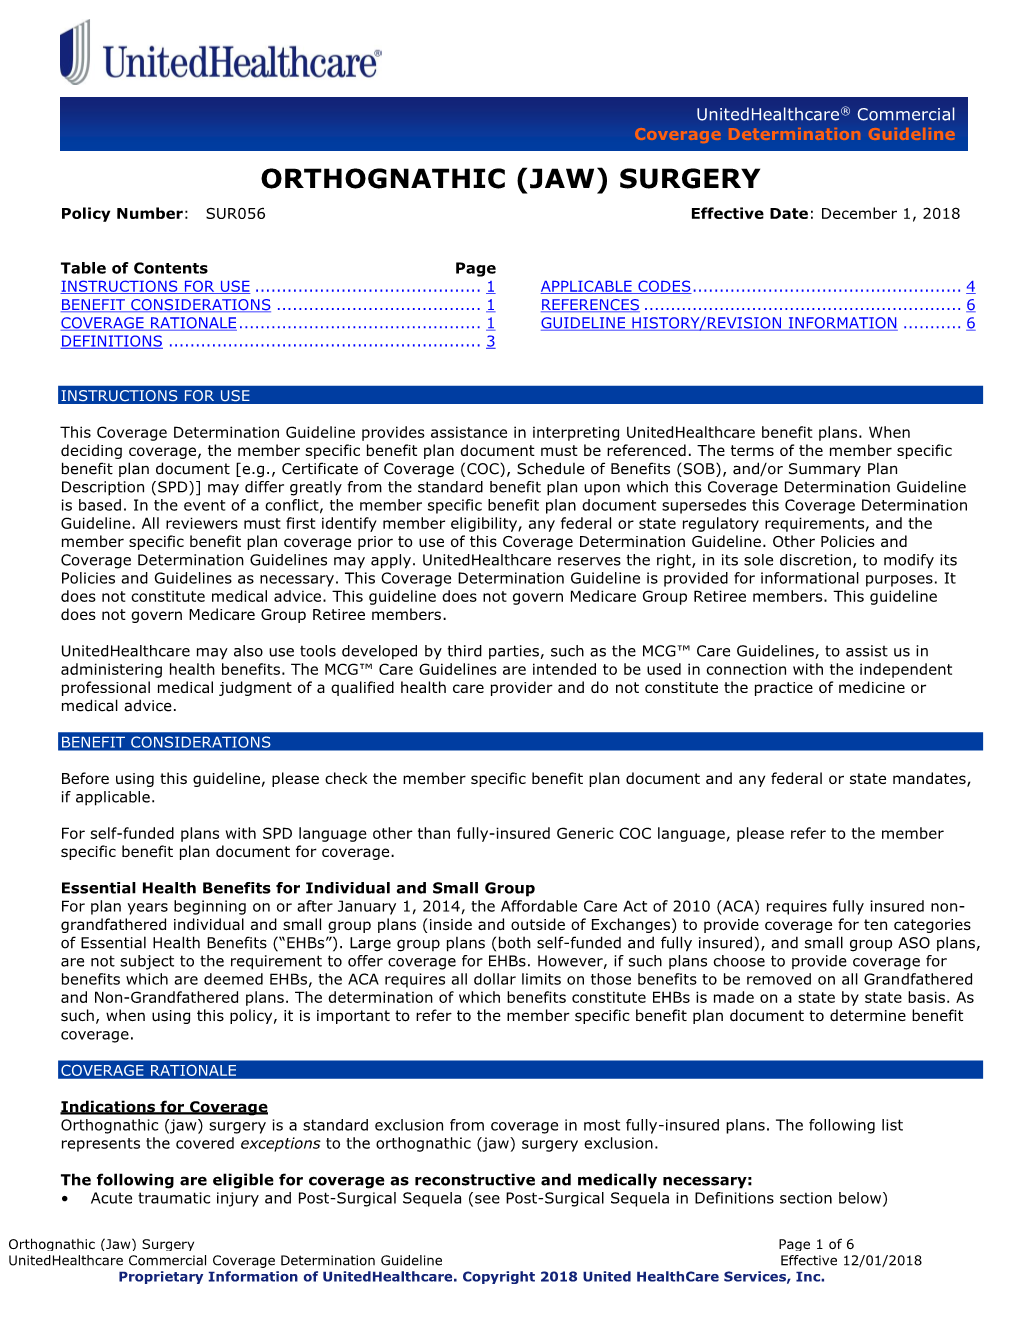 (JAW) SURGERY Policy Number: SUR056 Effective Date: December 1, 2018